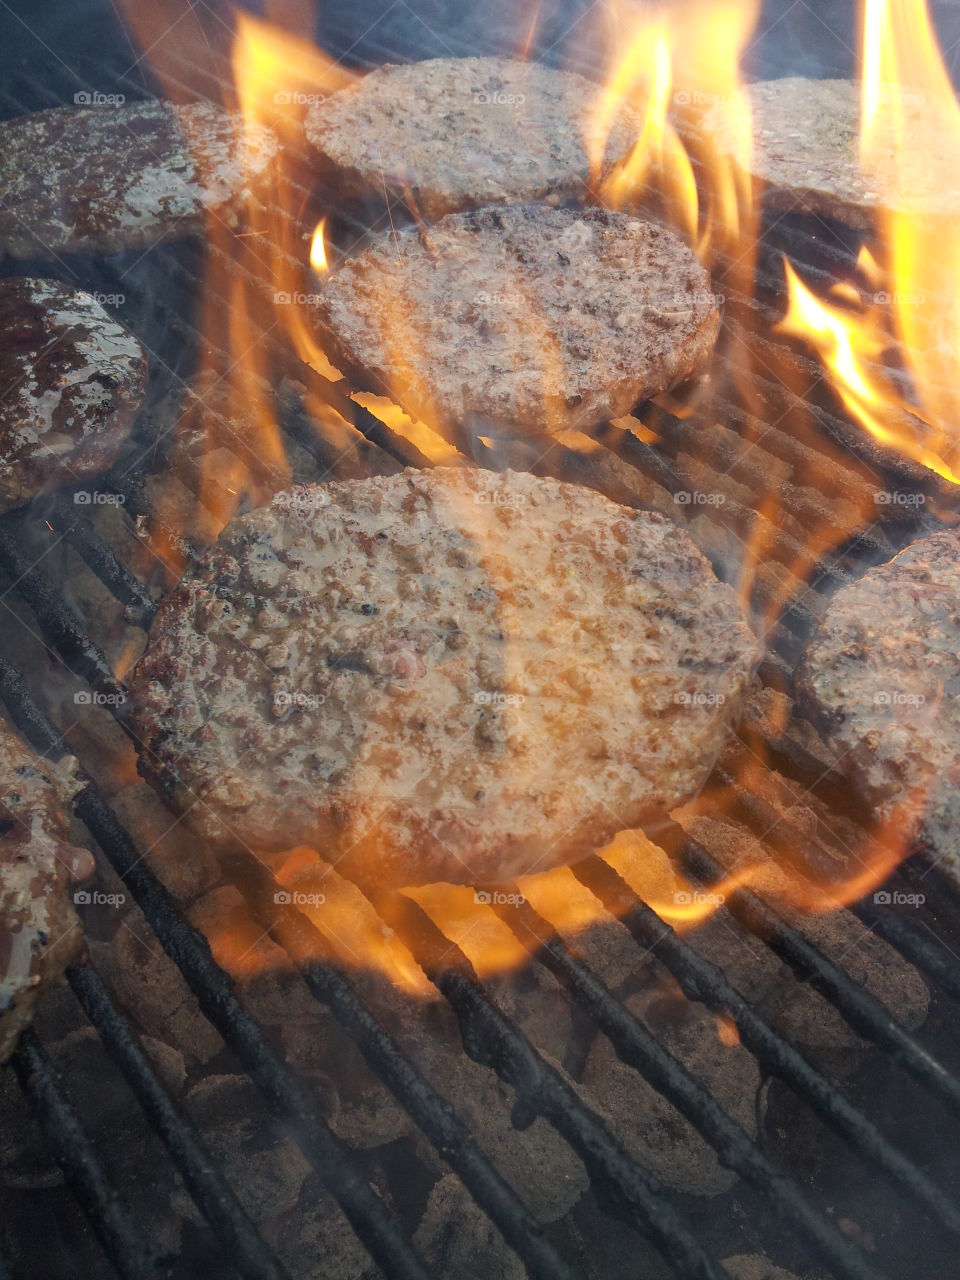 Flame kissed hamburgers on the grill